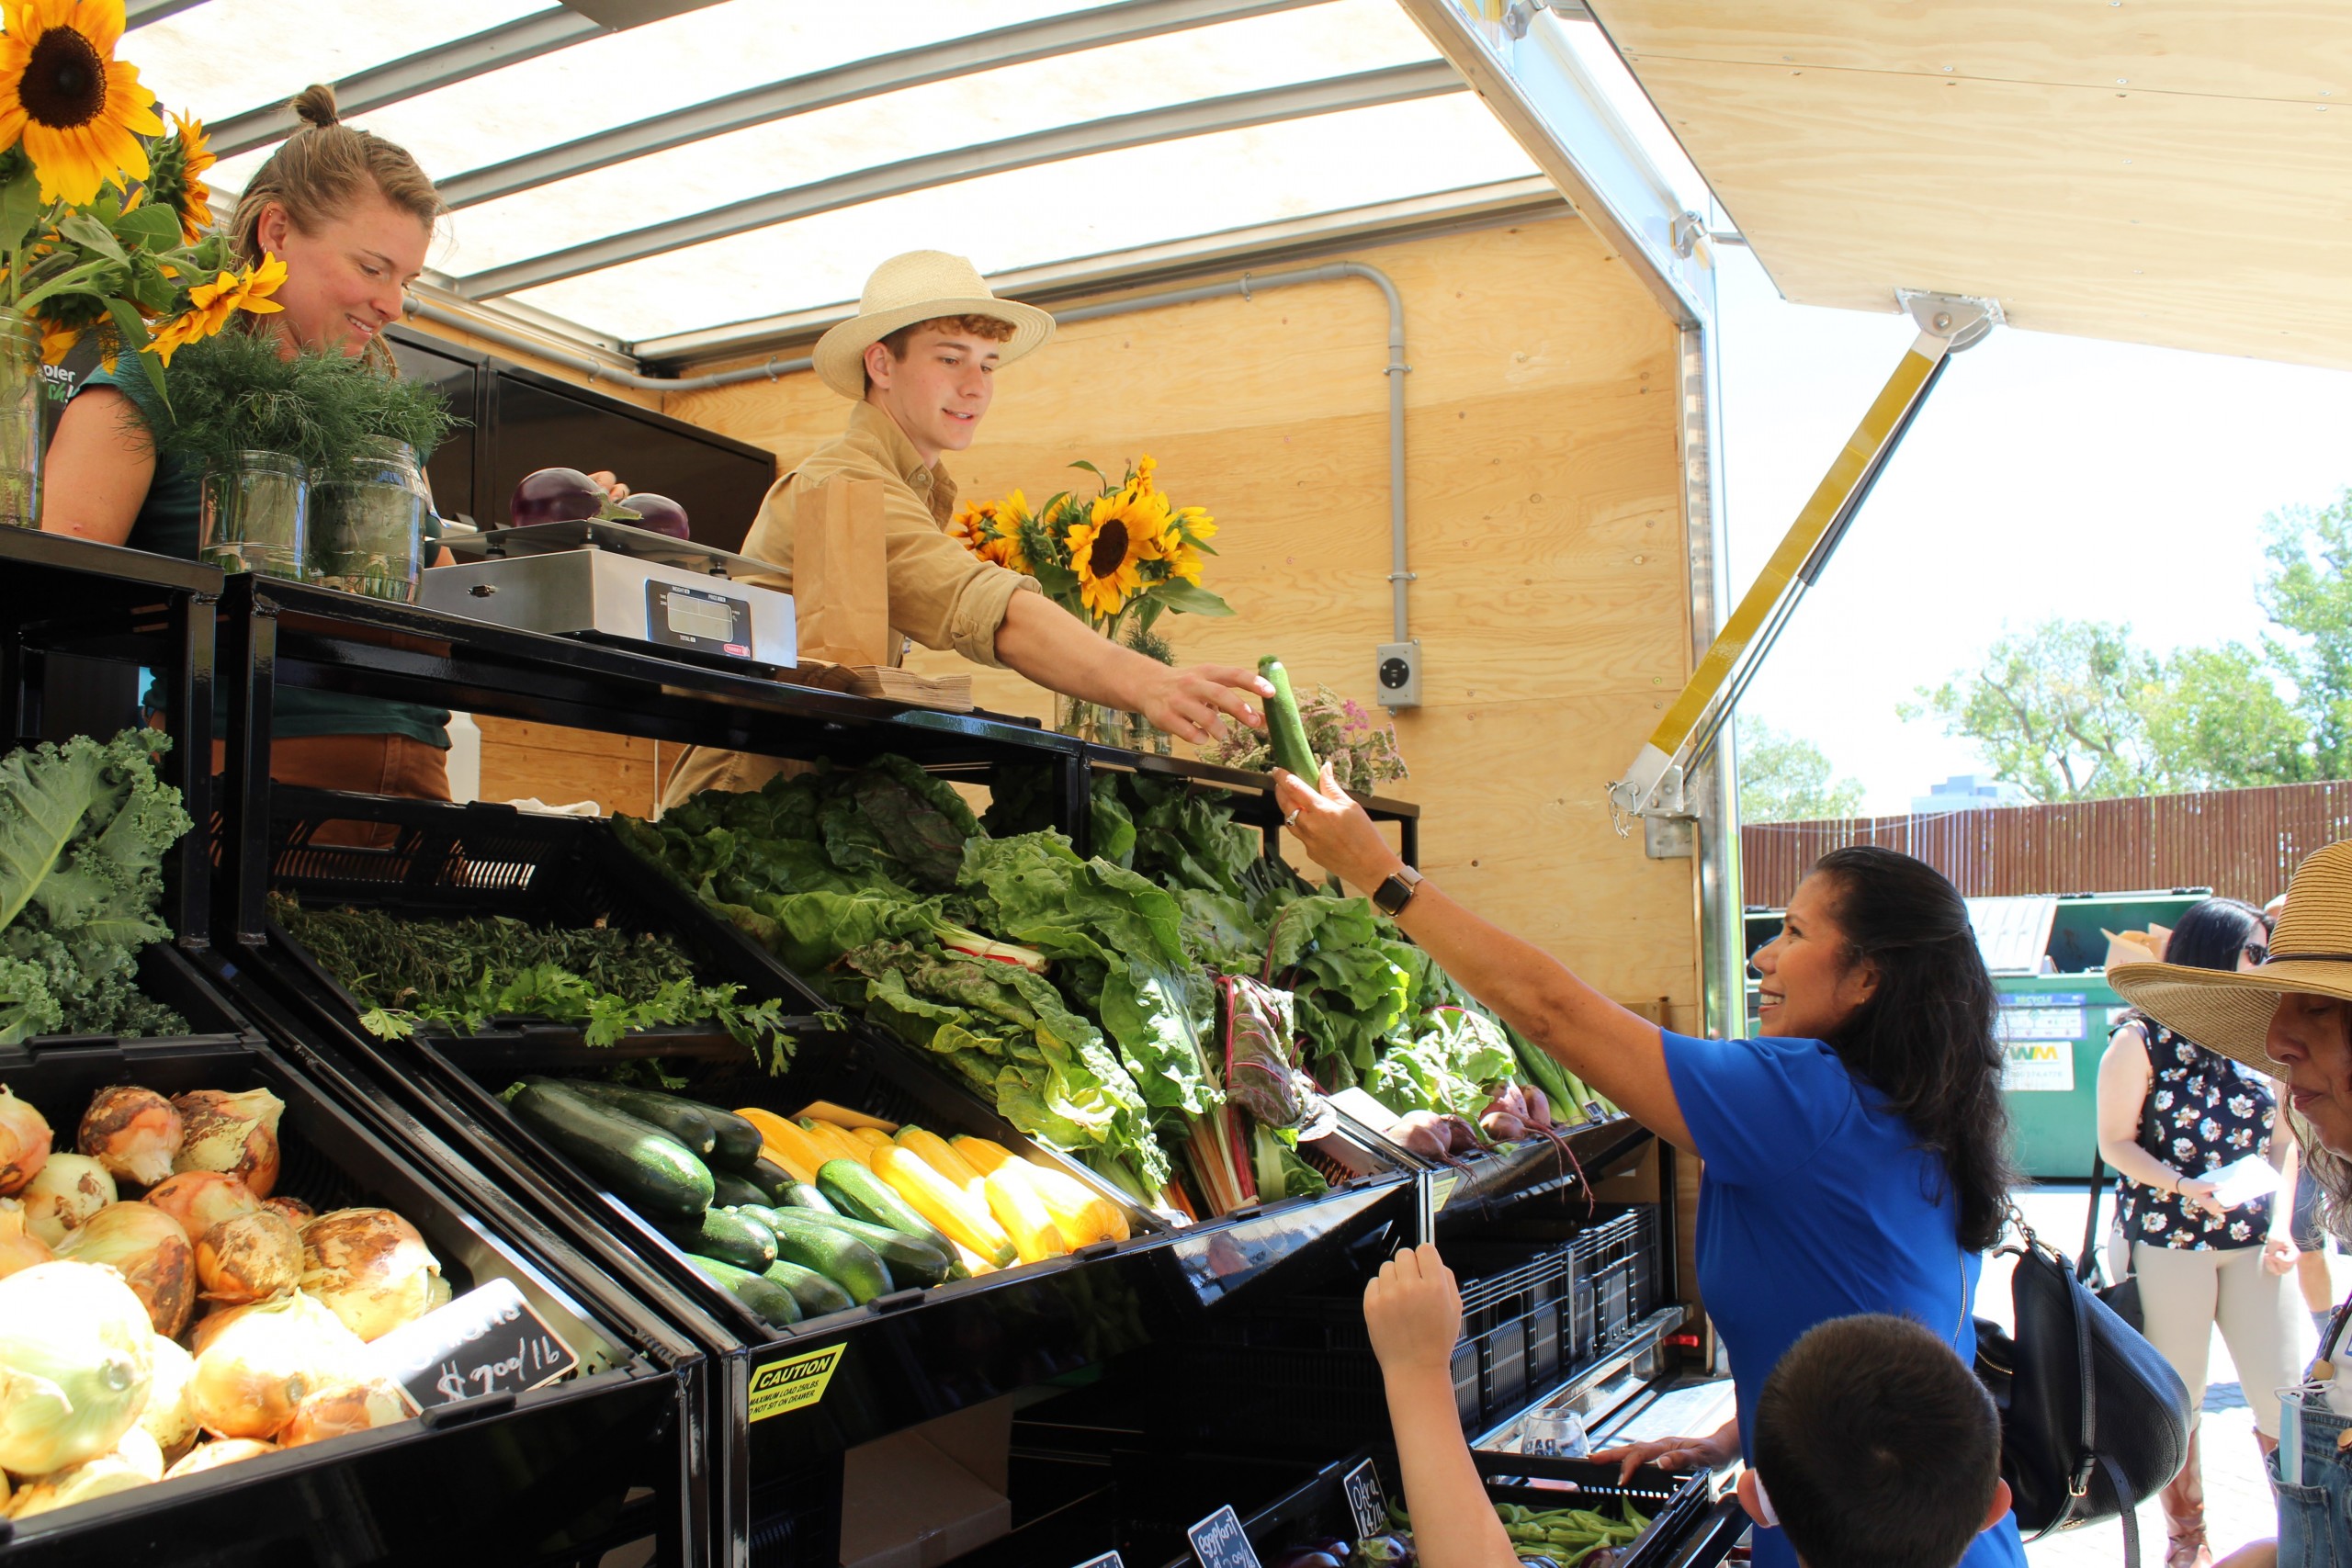 A New Mobile Farmers Market To Hit The Streets - Sactown Magazine